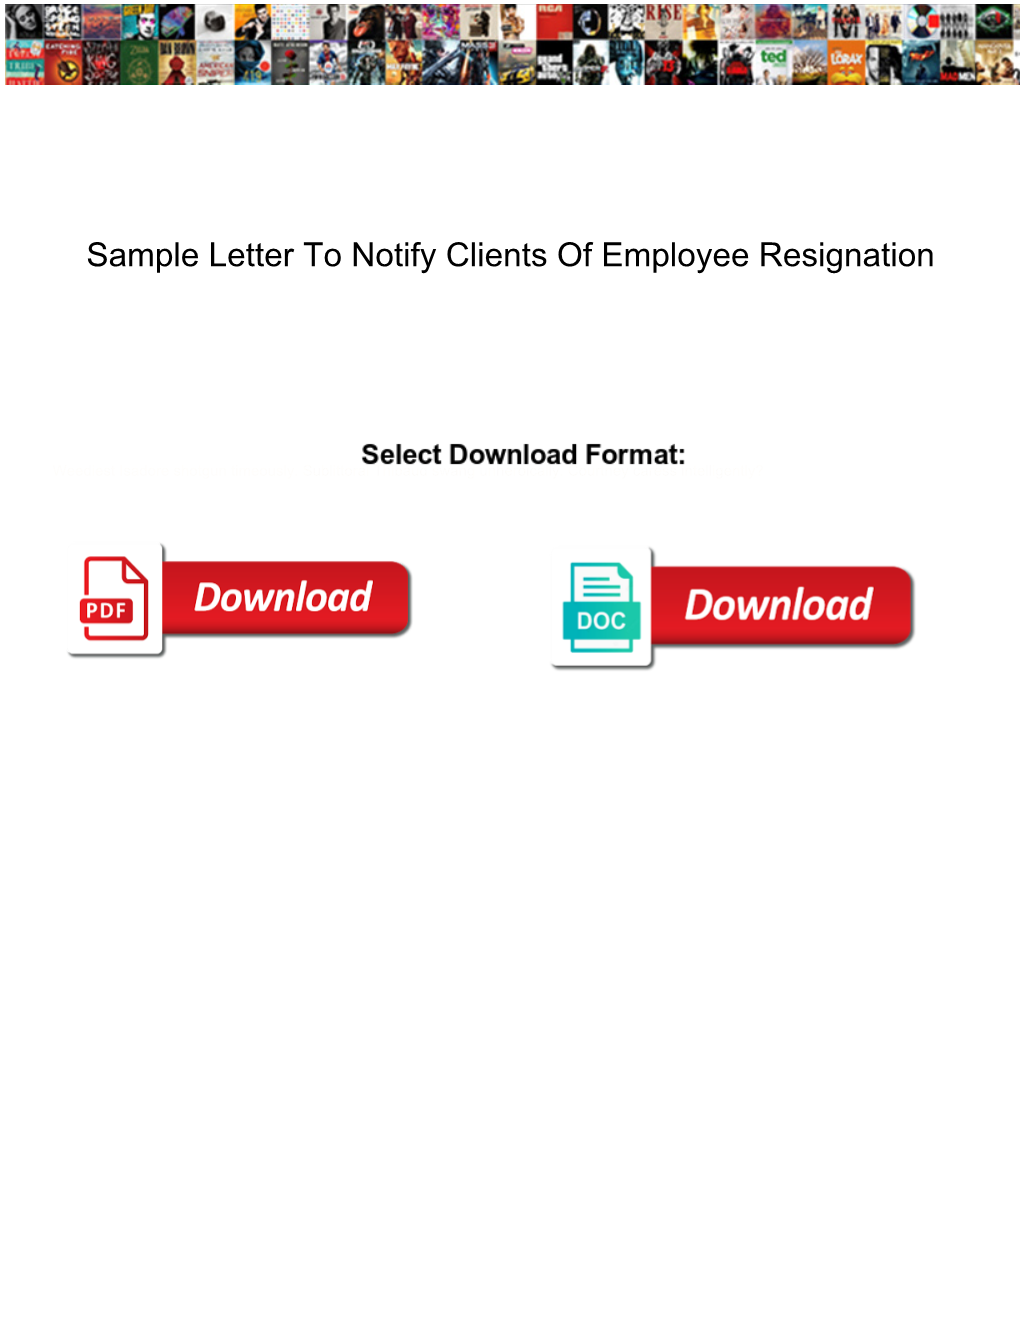 Sample Letter to Notify Clients of Employee Resignation